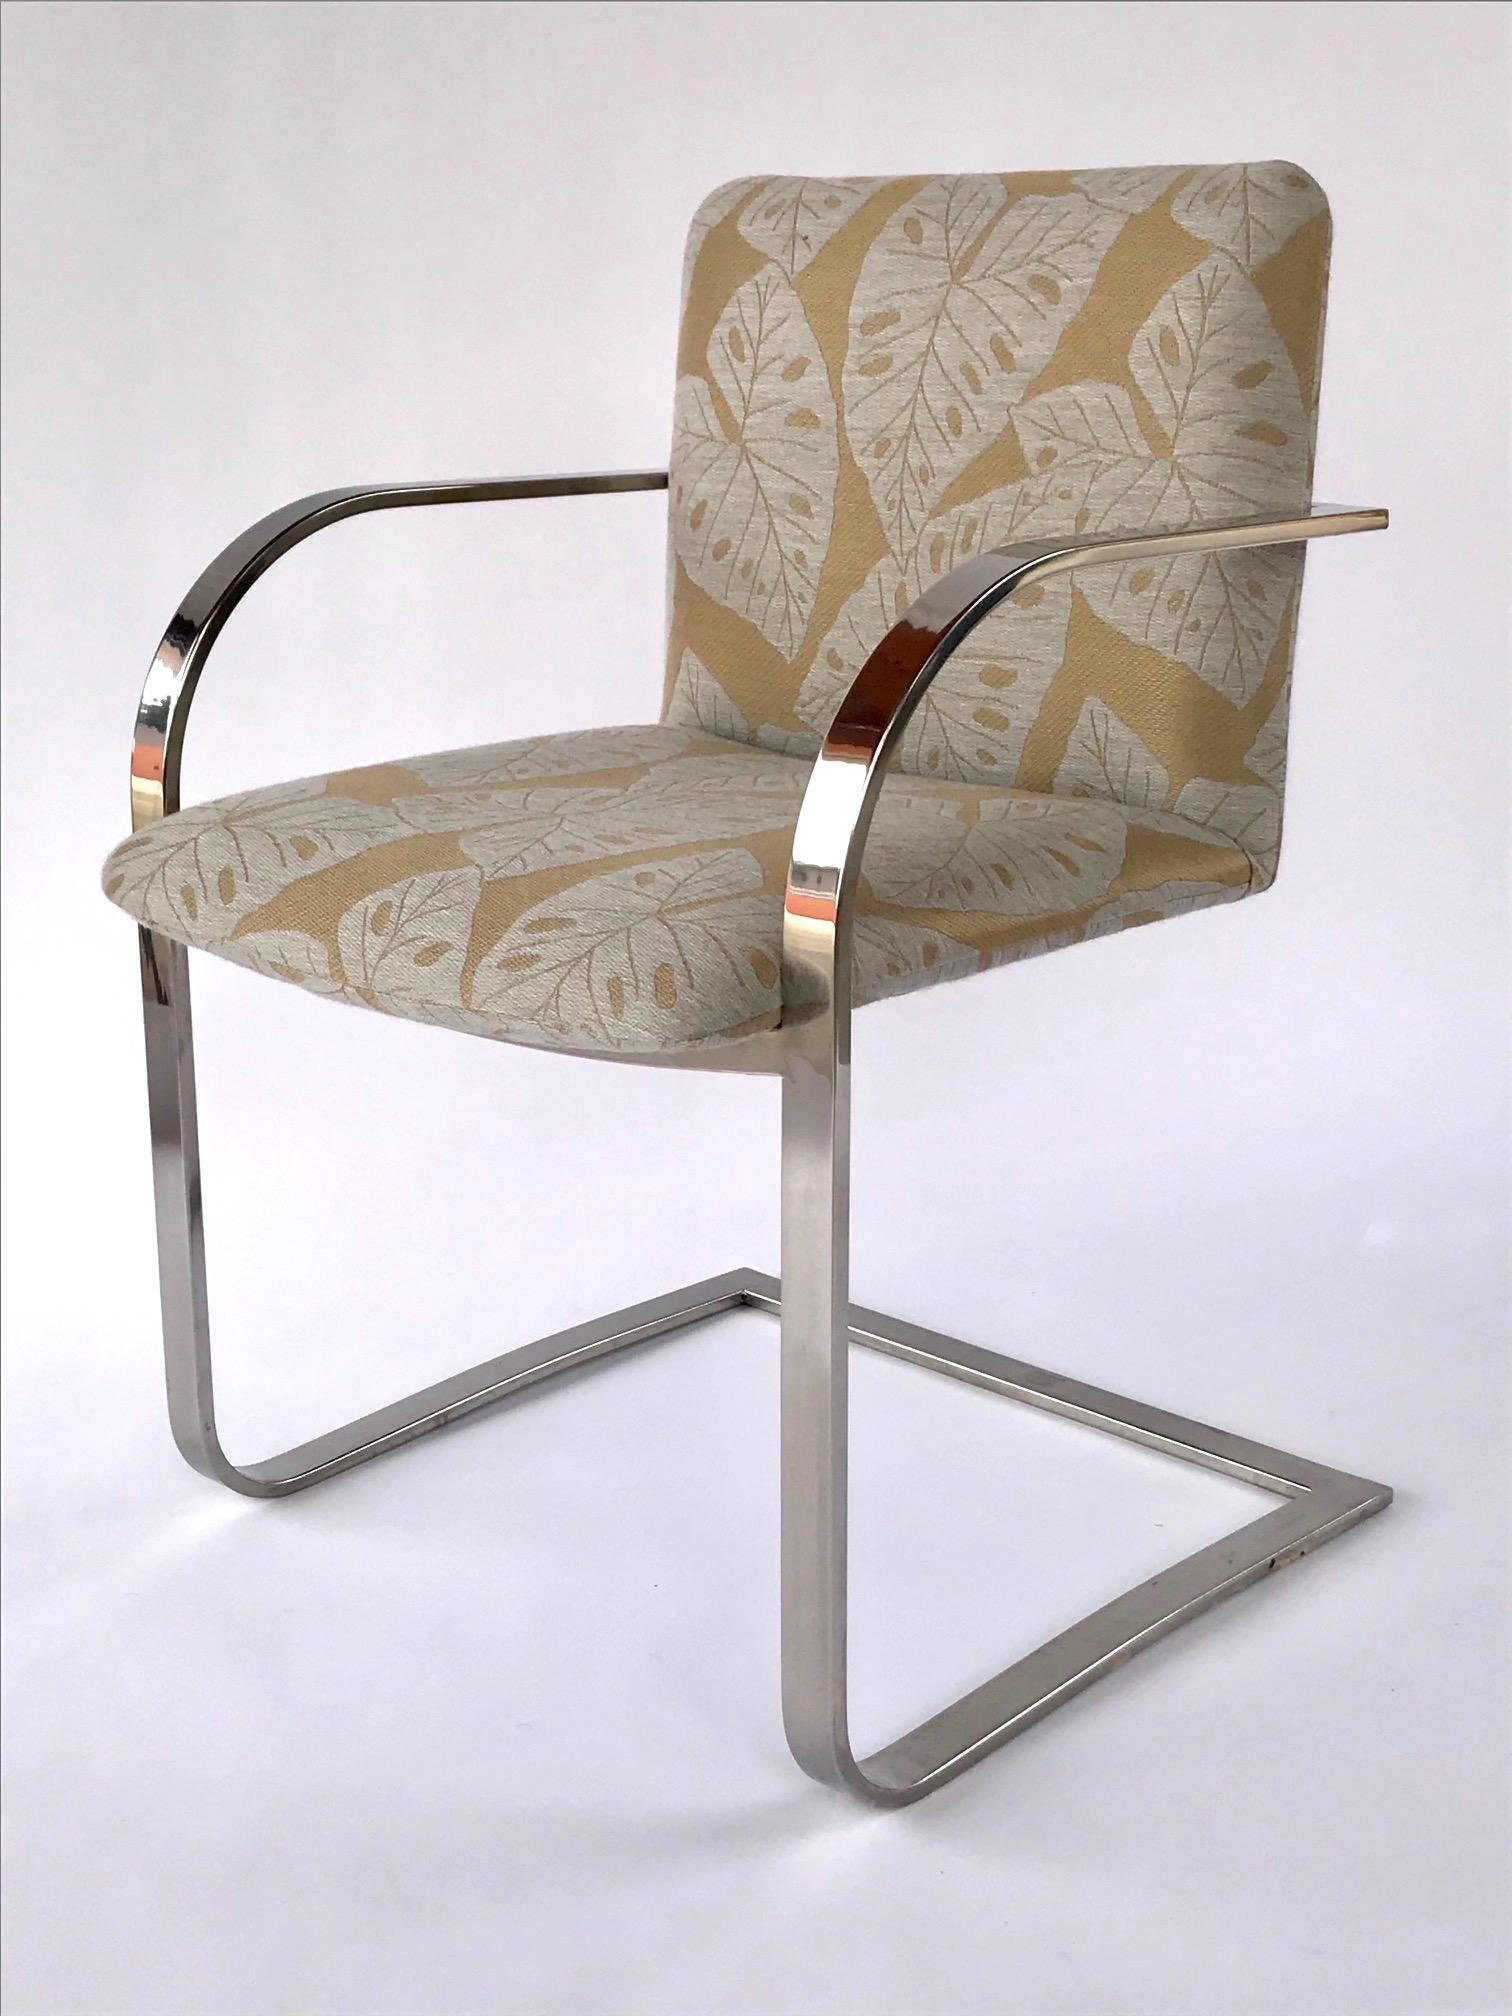 Mid-Century Modern desk chair or side chair with cantilevered steel frame in chrome. Chair has streamlined profile with curved armrests and floating seat design. Newly upholstered in bold handwoven fabric with tropical leaf print in monochromatic